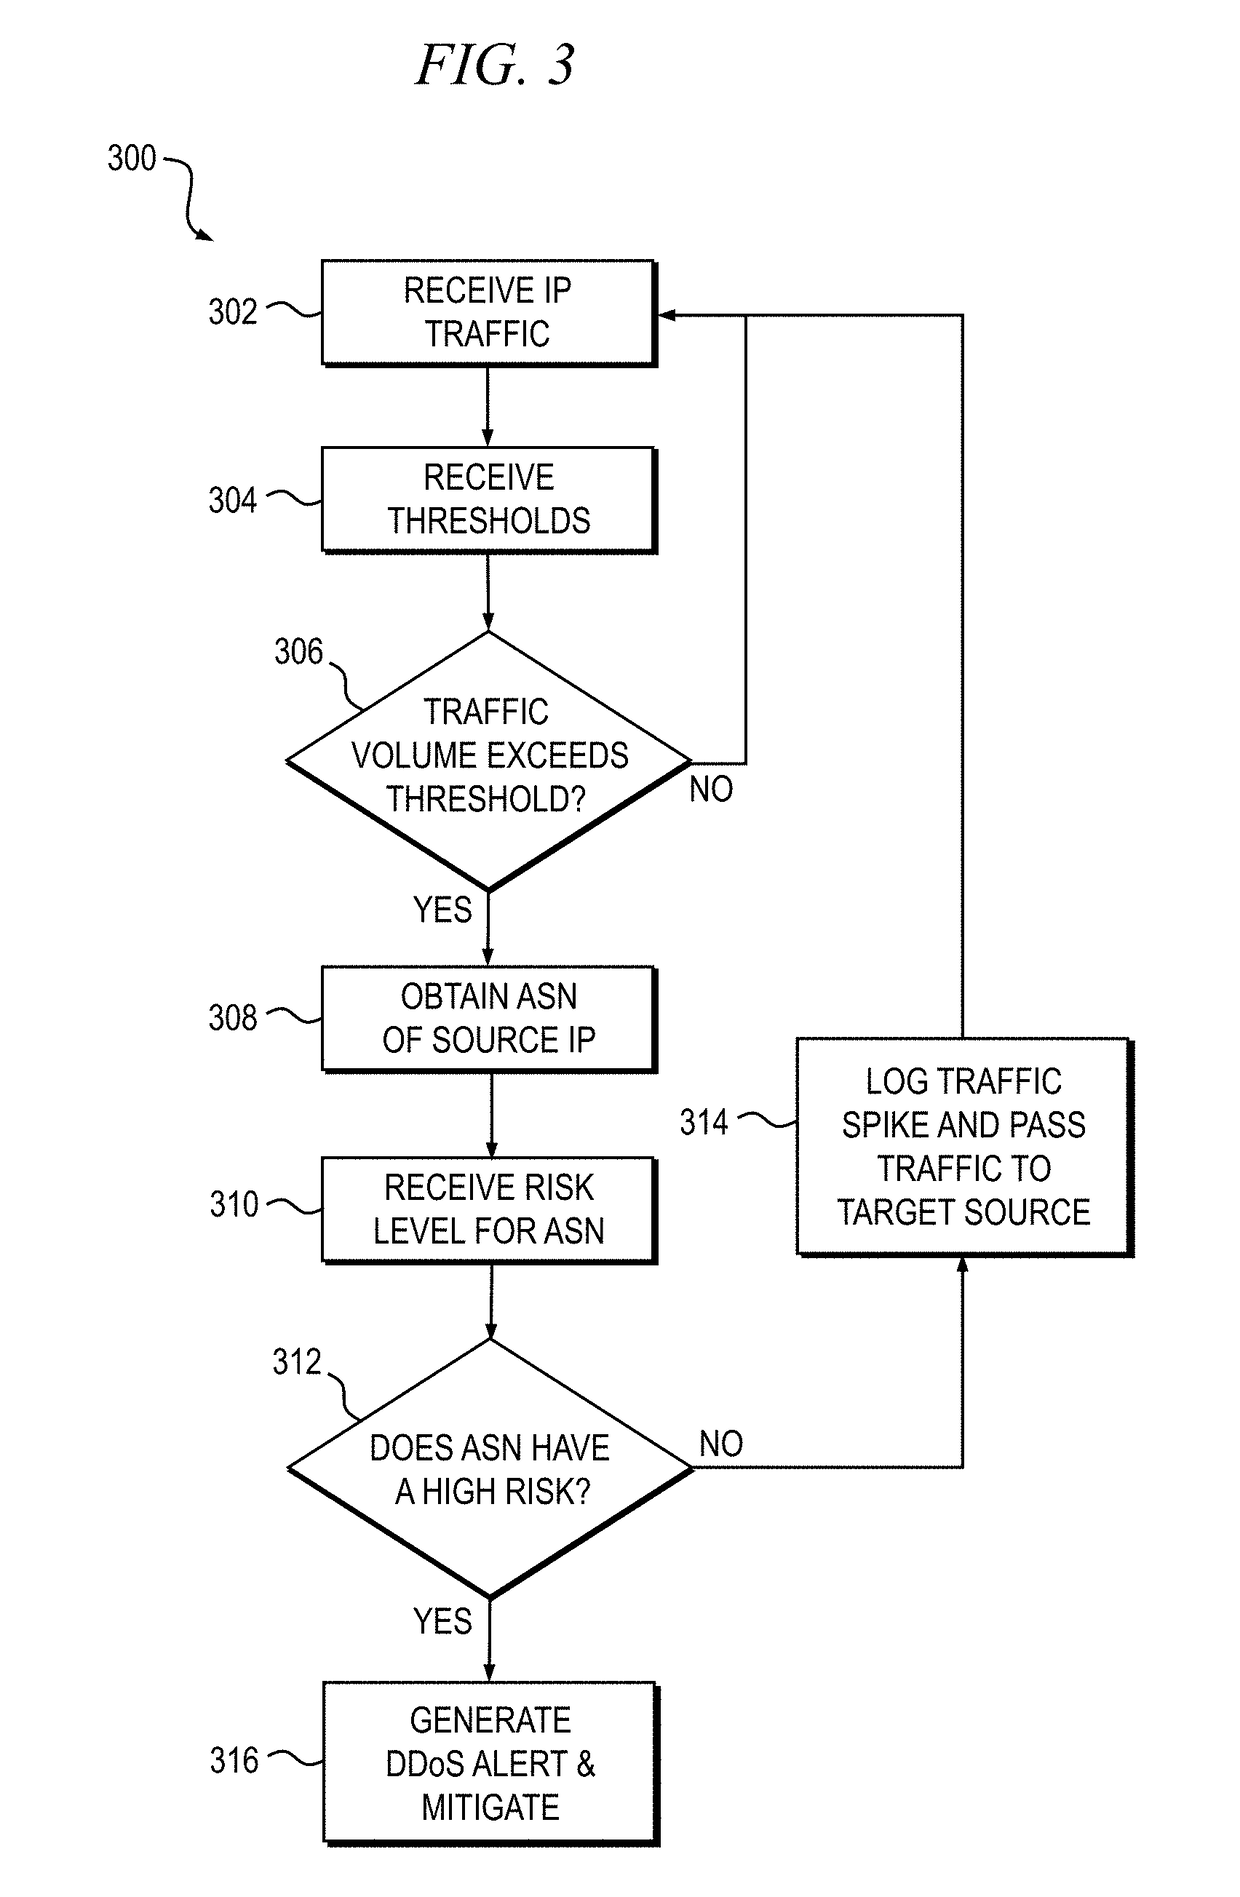 Distributed denial-of-service attack detection and mitigation based on autonomous system number